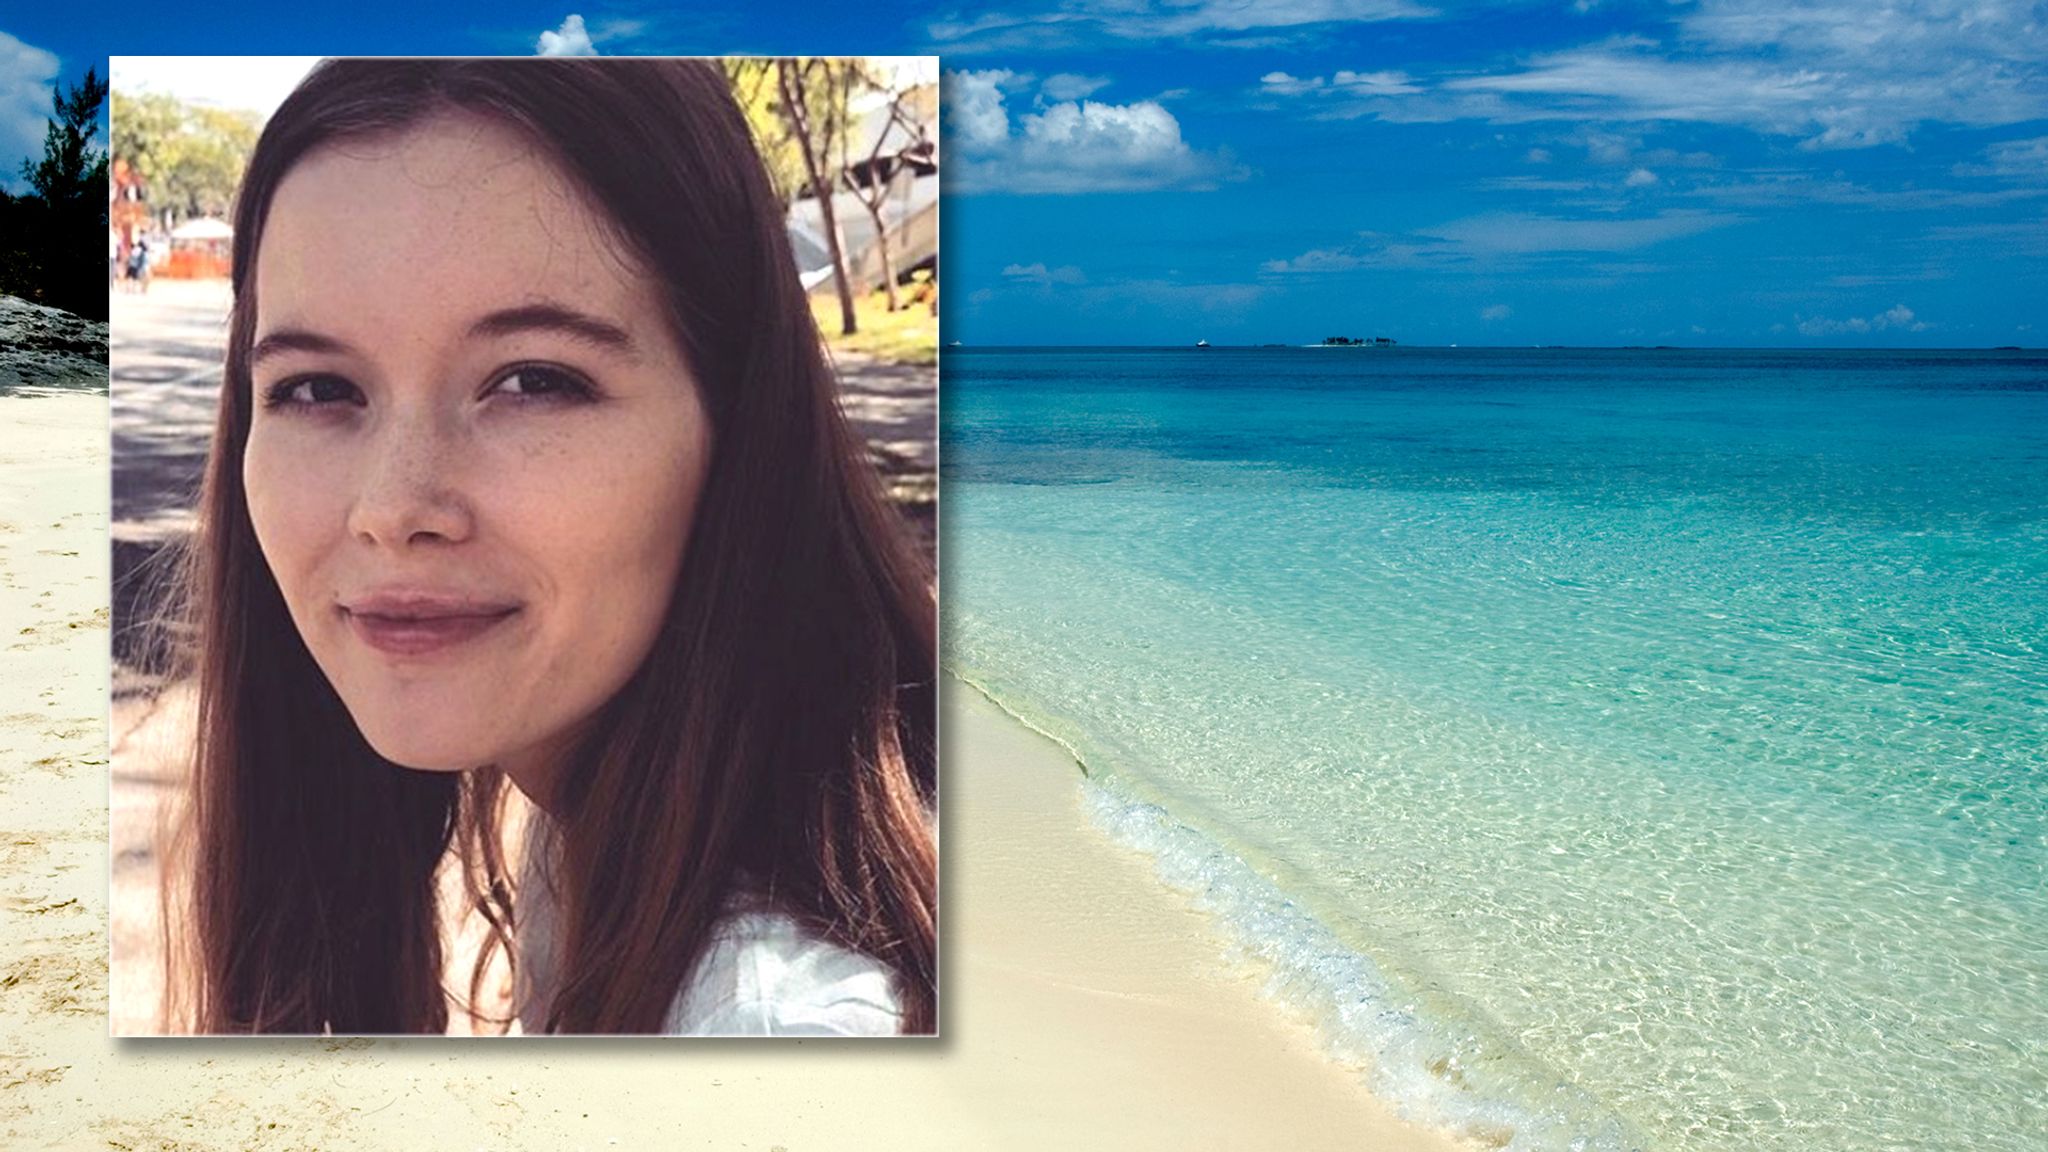 attack: Woman, 21, killed three sharks while snorkelling in Bahamas | World News | Sky News